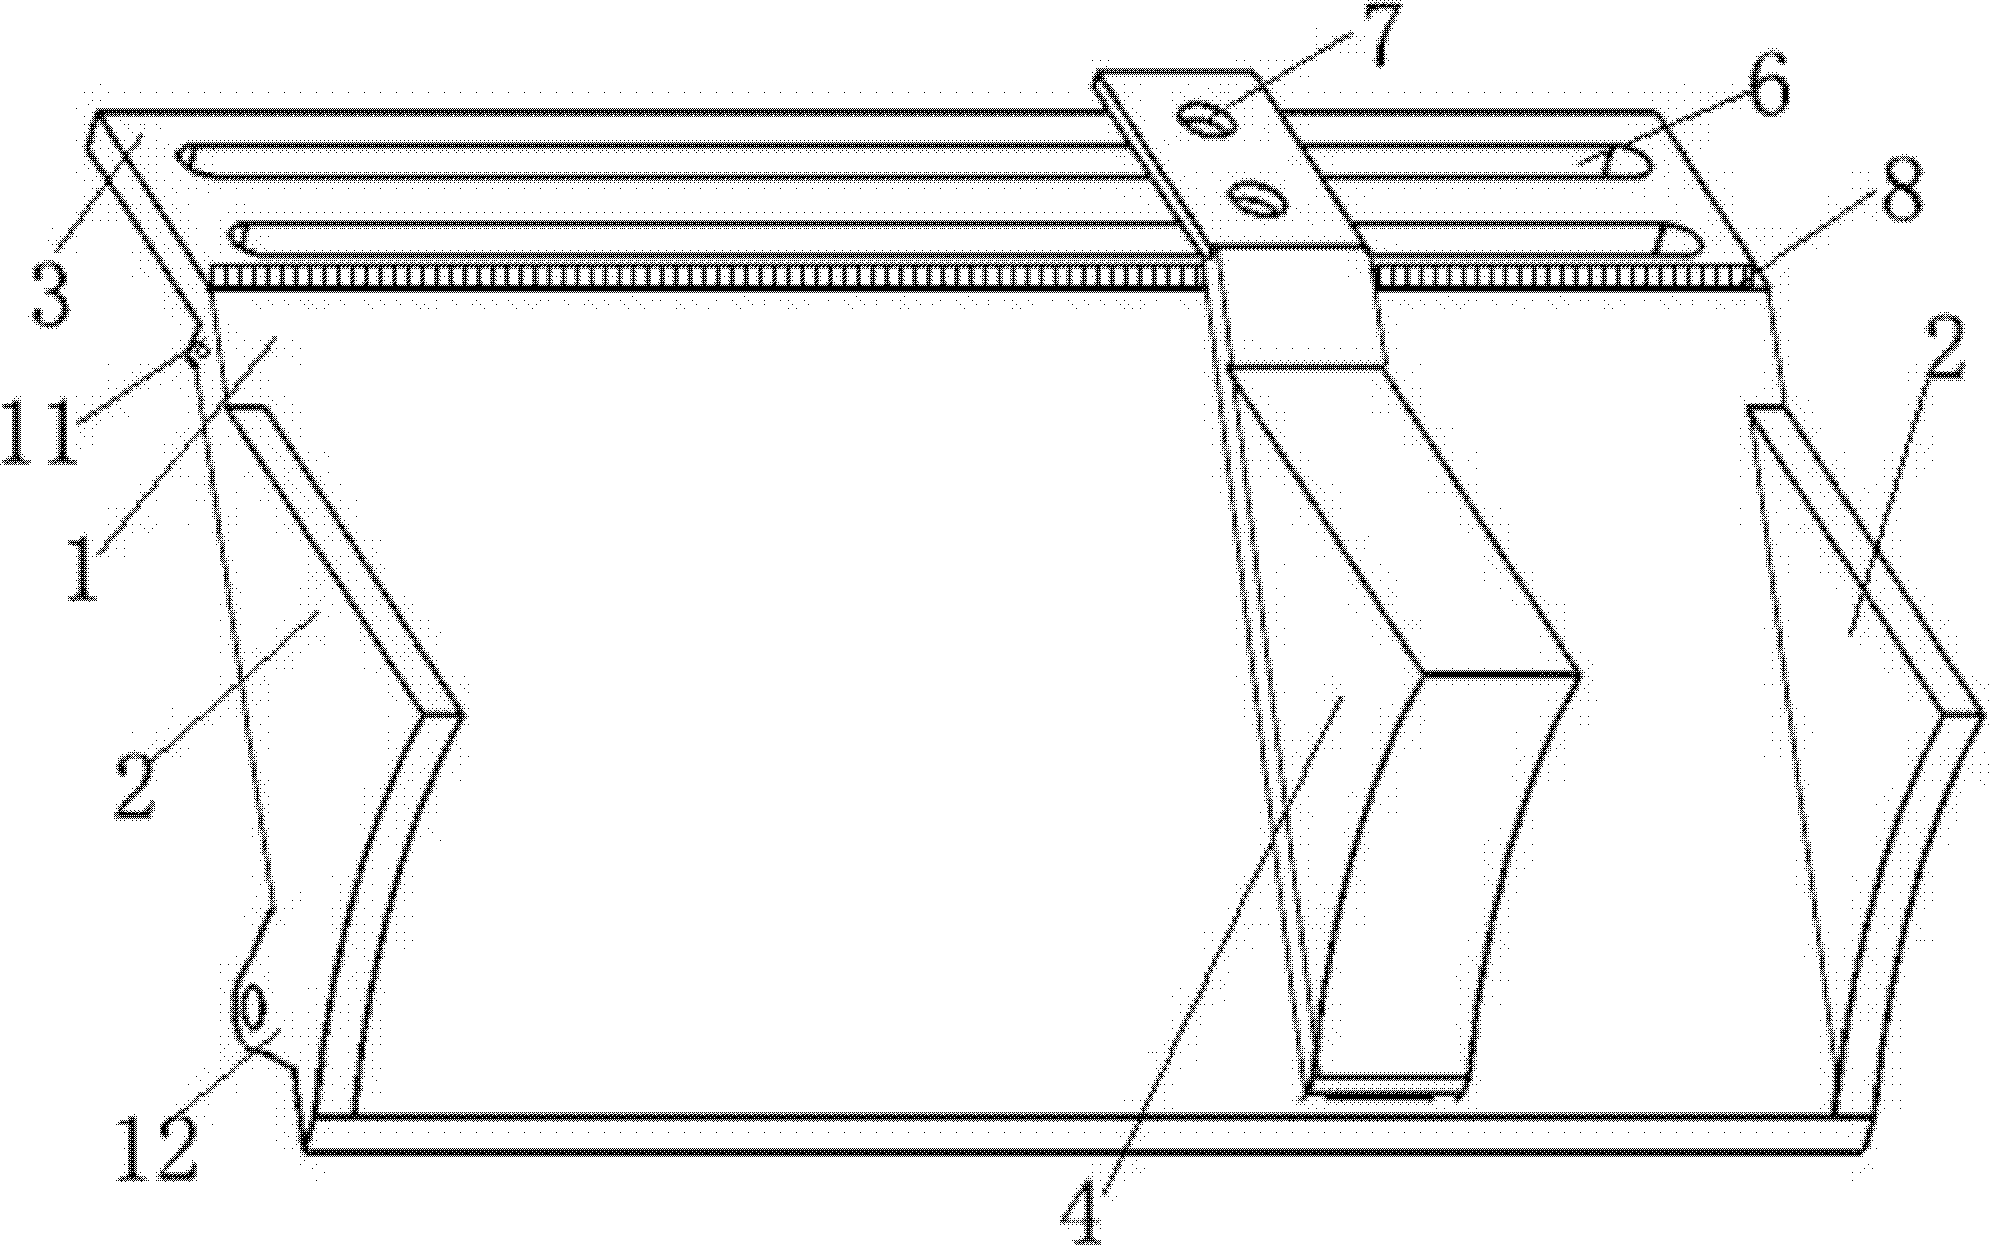 Ink tank with movable partition for rainbow printing and its assembly method